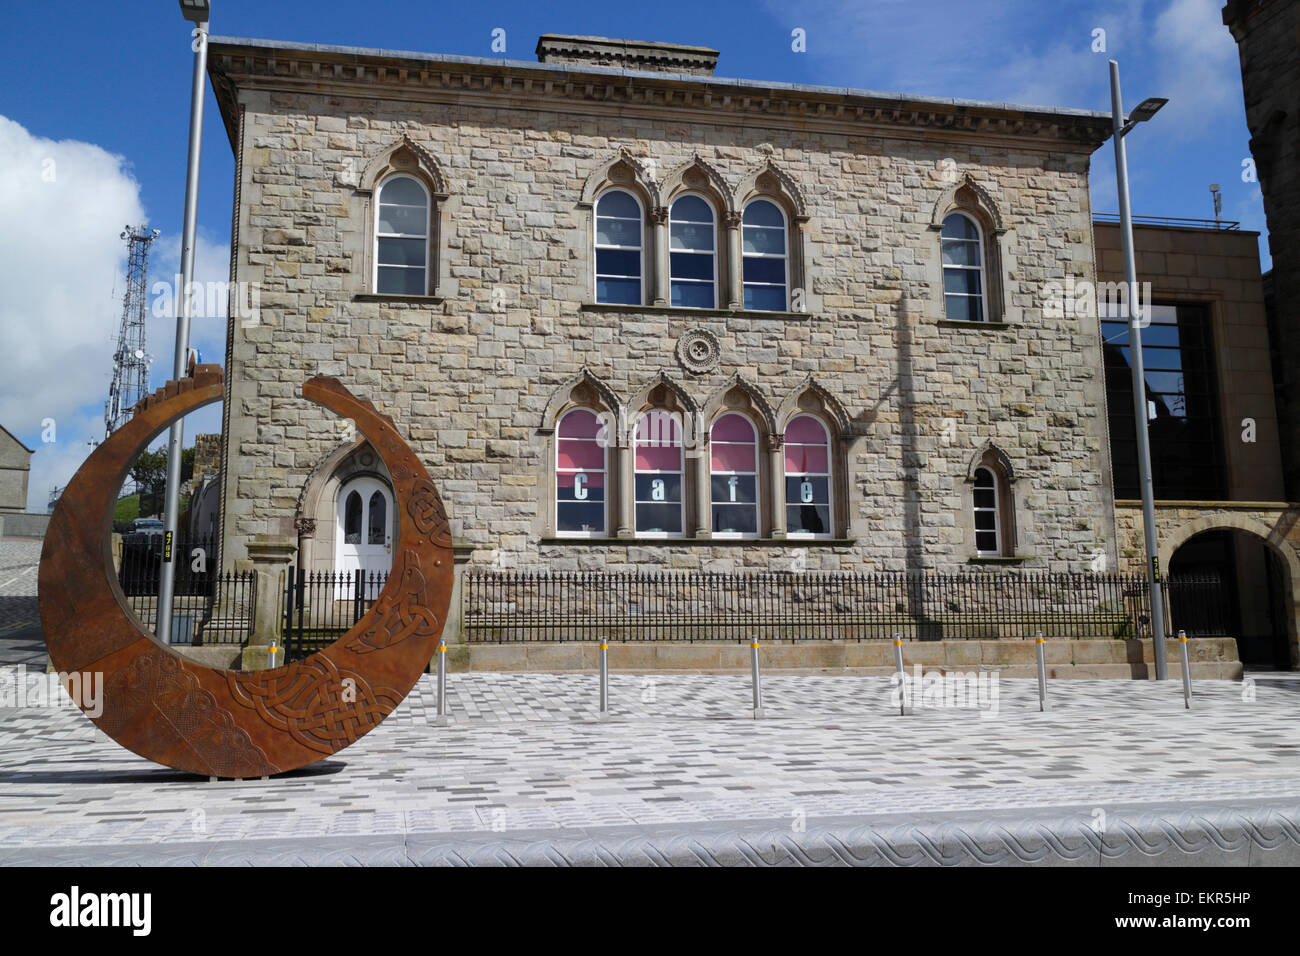 ranfurly house arts and visitors centre dungannon county tyrone northern ireland Stock Photo